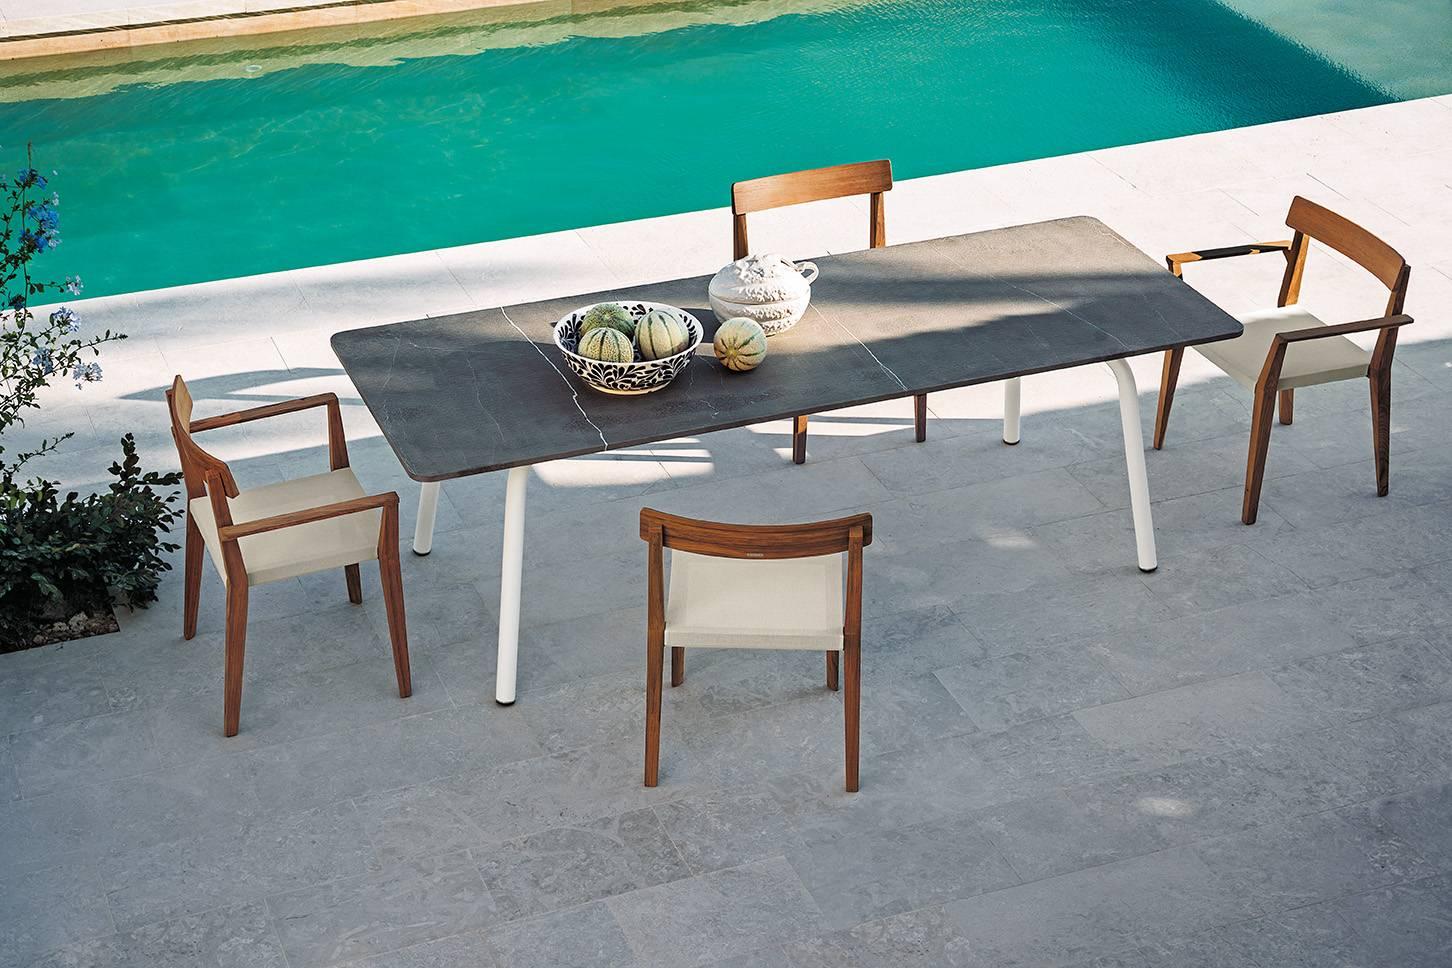 Modern Roda Grasshopper Dining Table for Outdoor/Indoor Use for Eight-Ten People For Sale